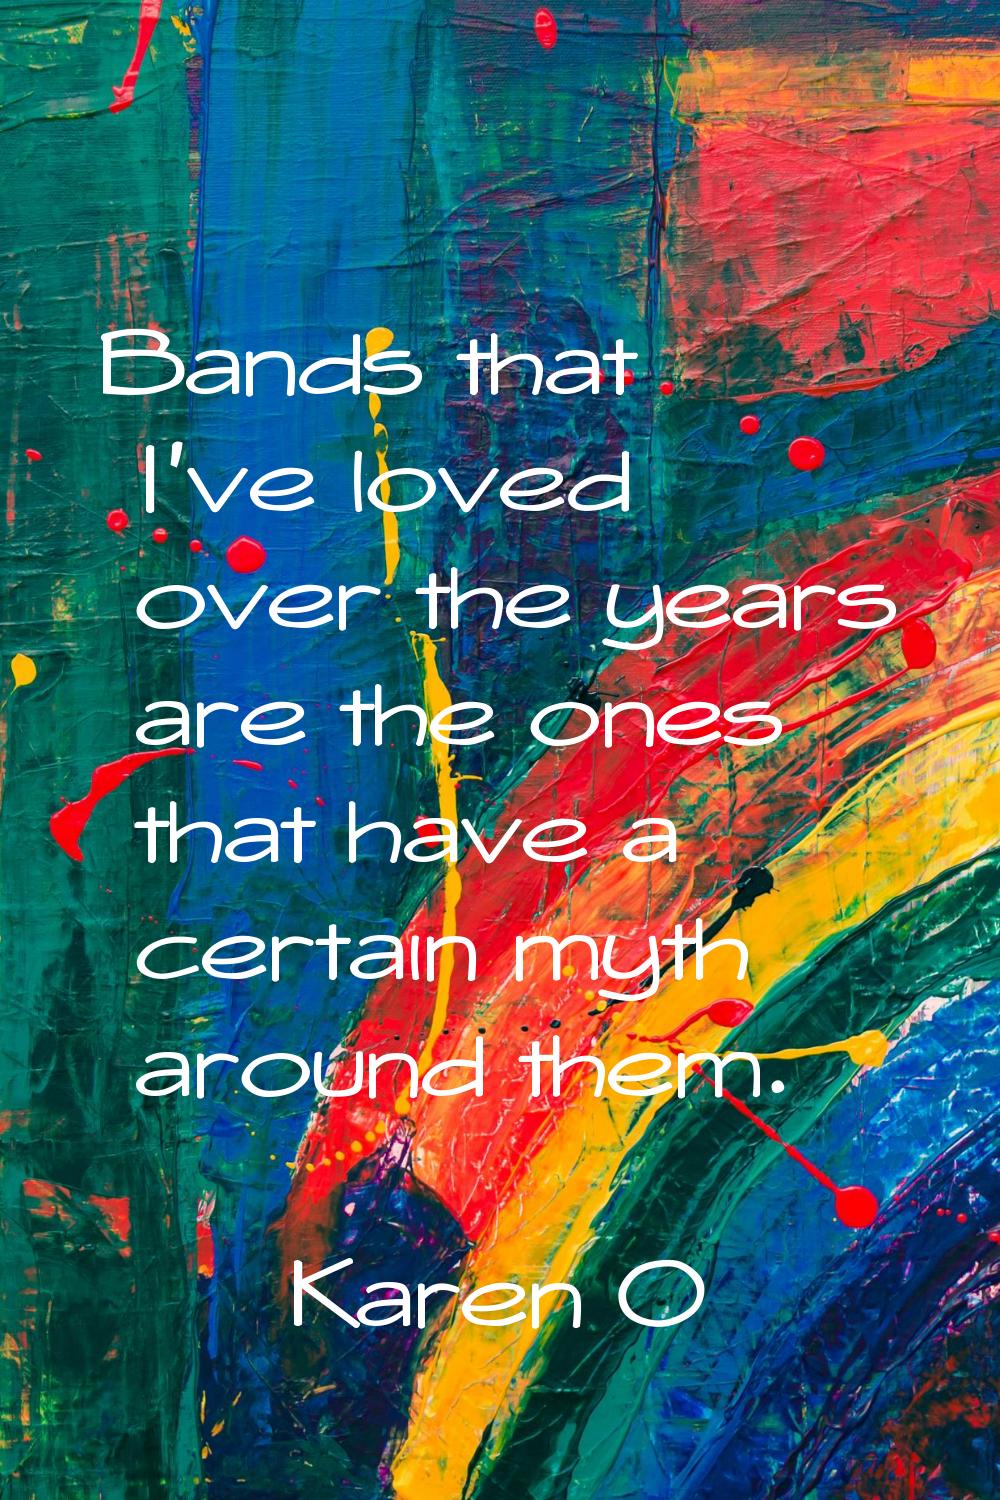 Bands that I've loved over the years are the ones that have a certain myth around them.